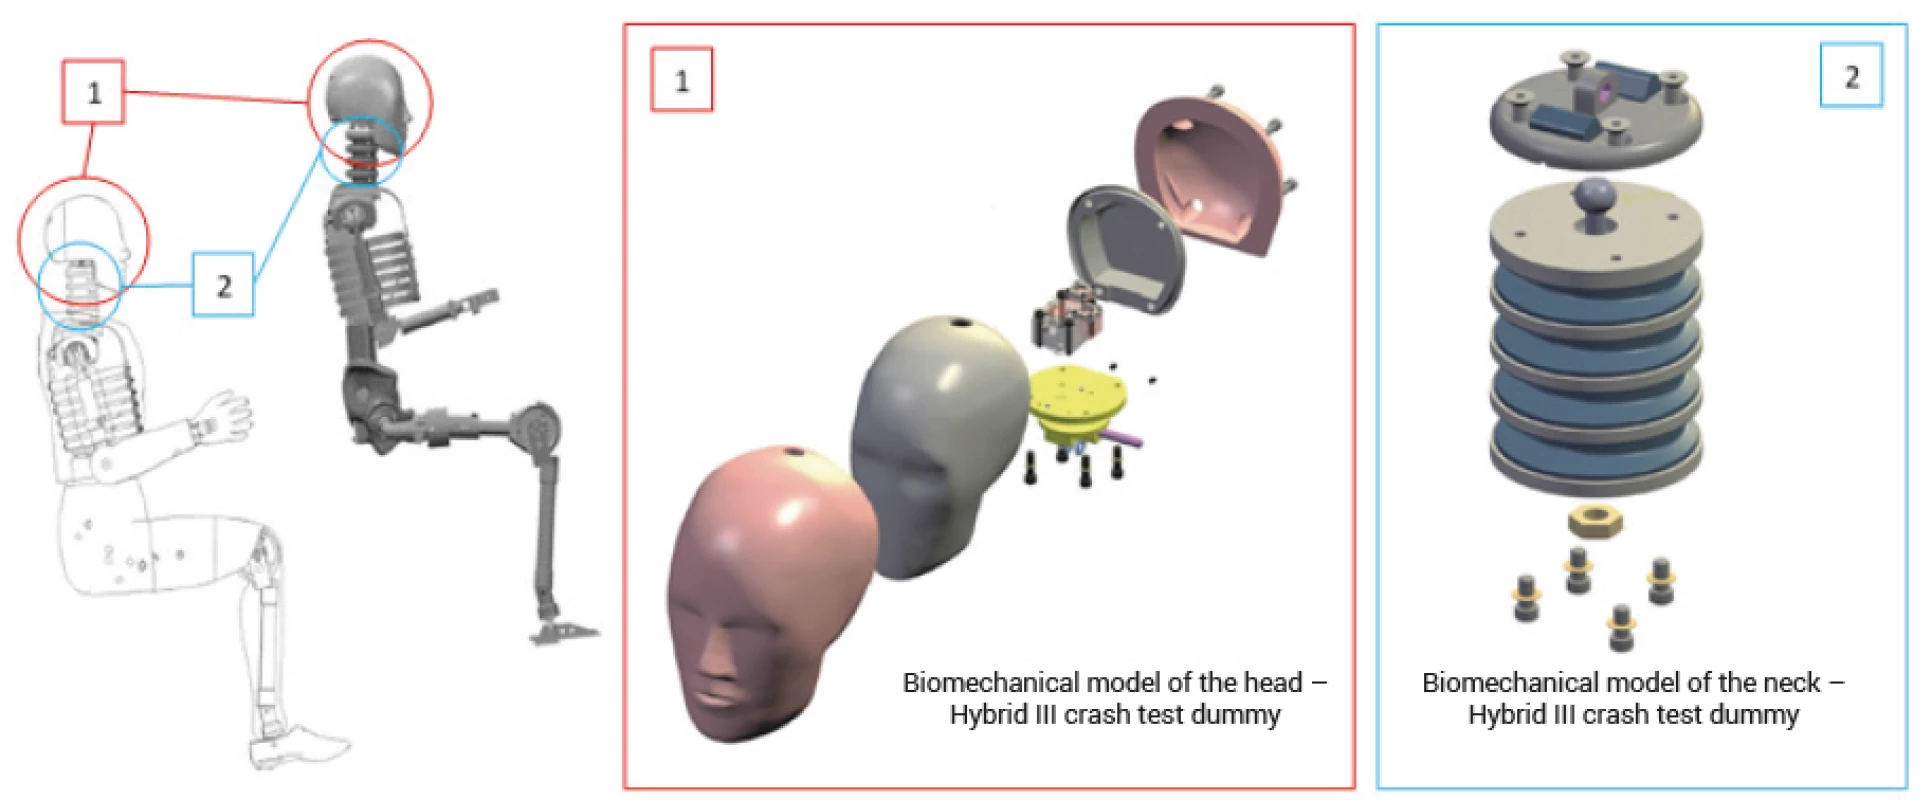 Design of the pivotal parts of the Hybrid III crash test dummy – parts used within experimental measurements [1]